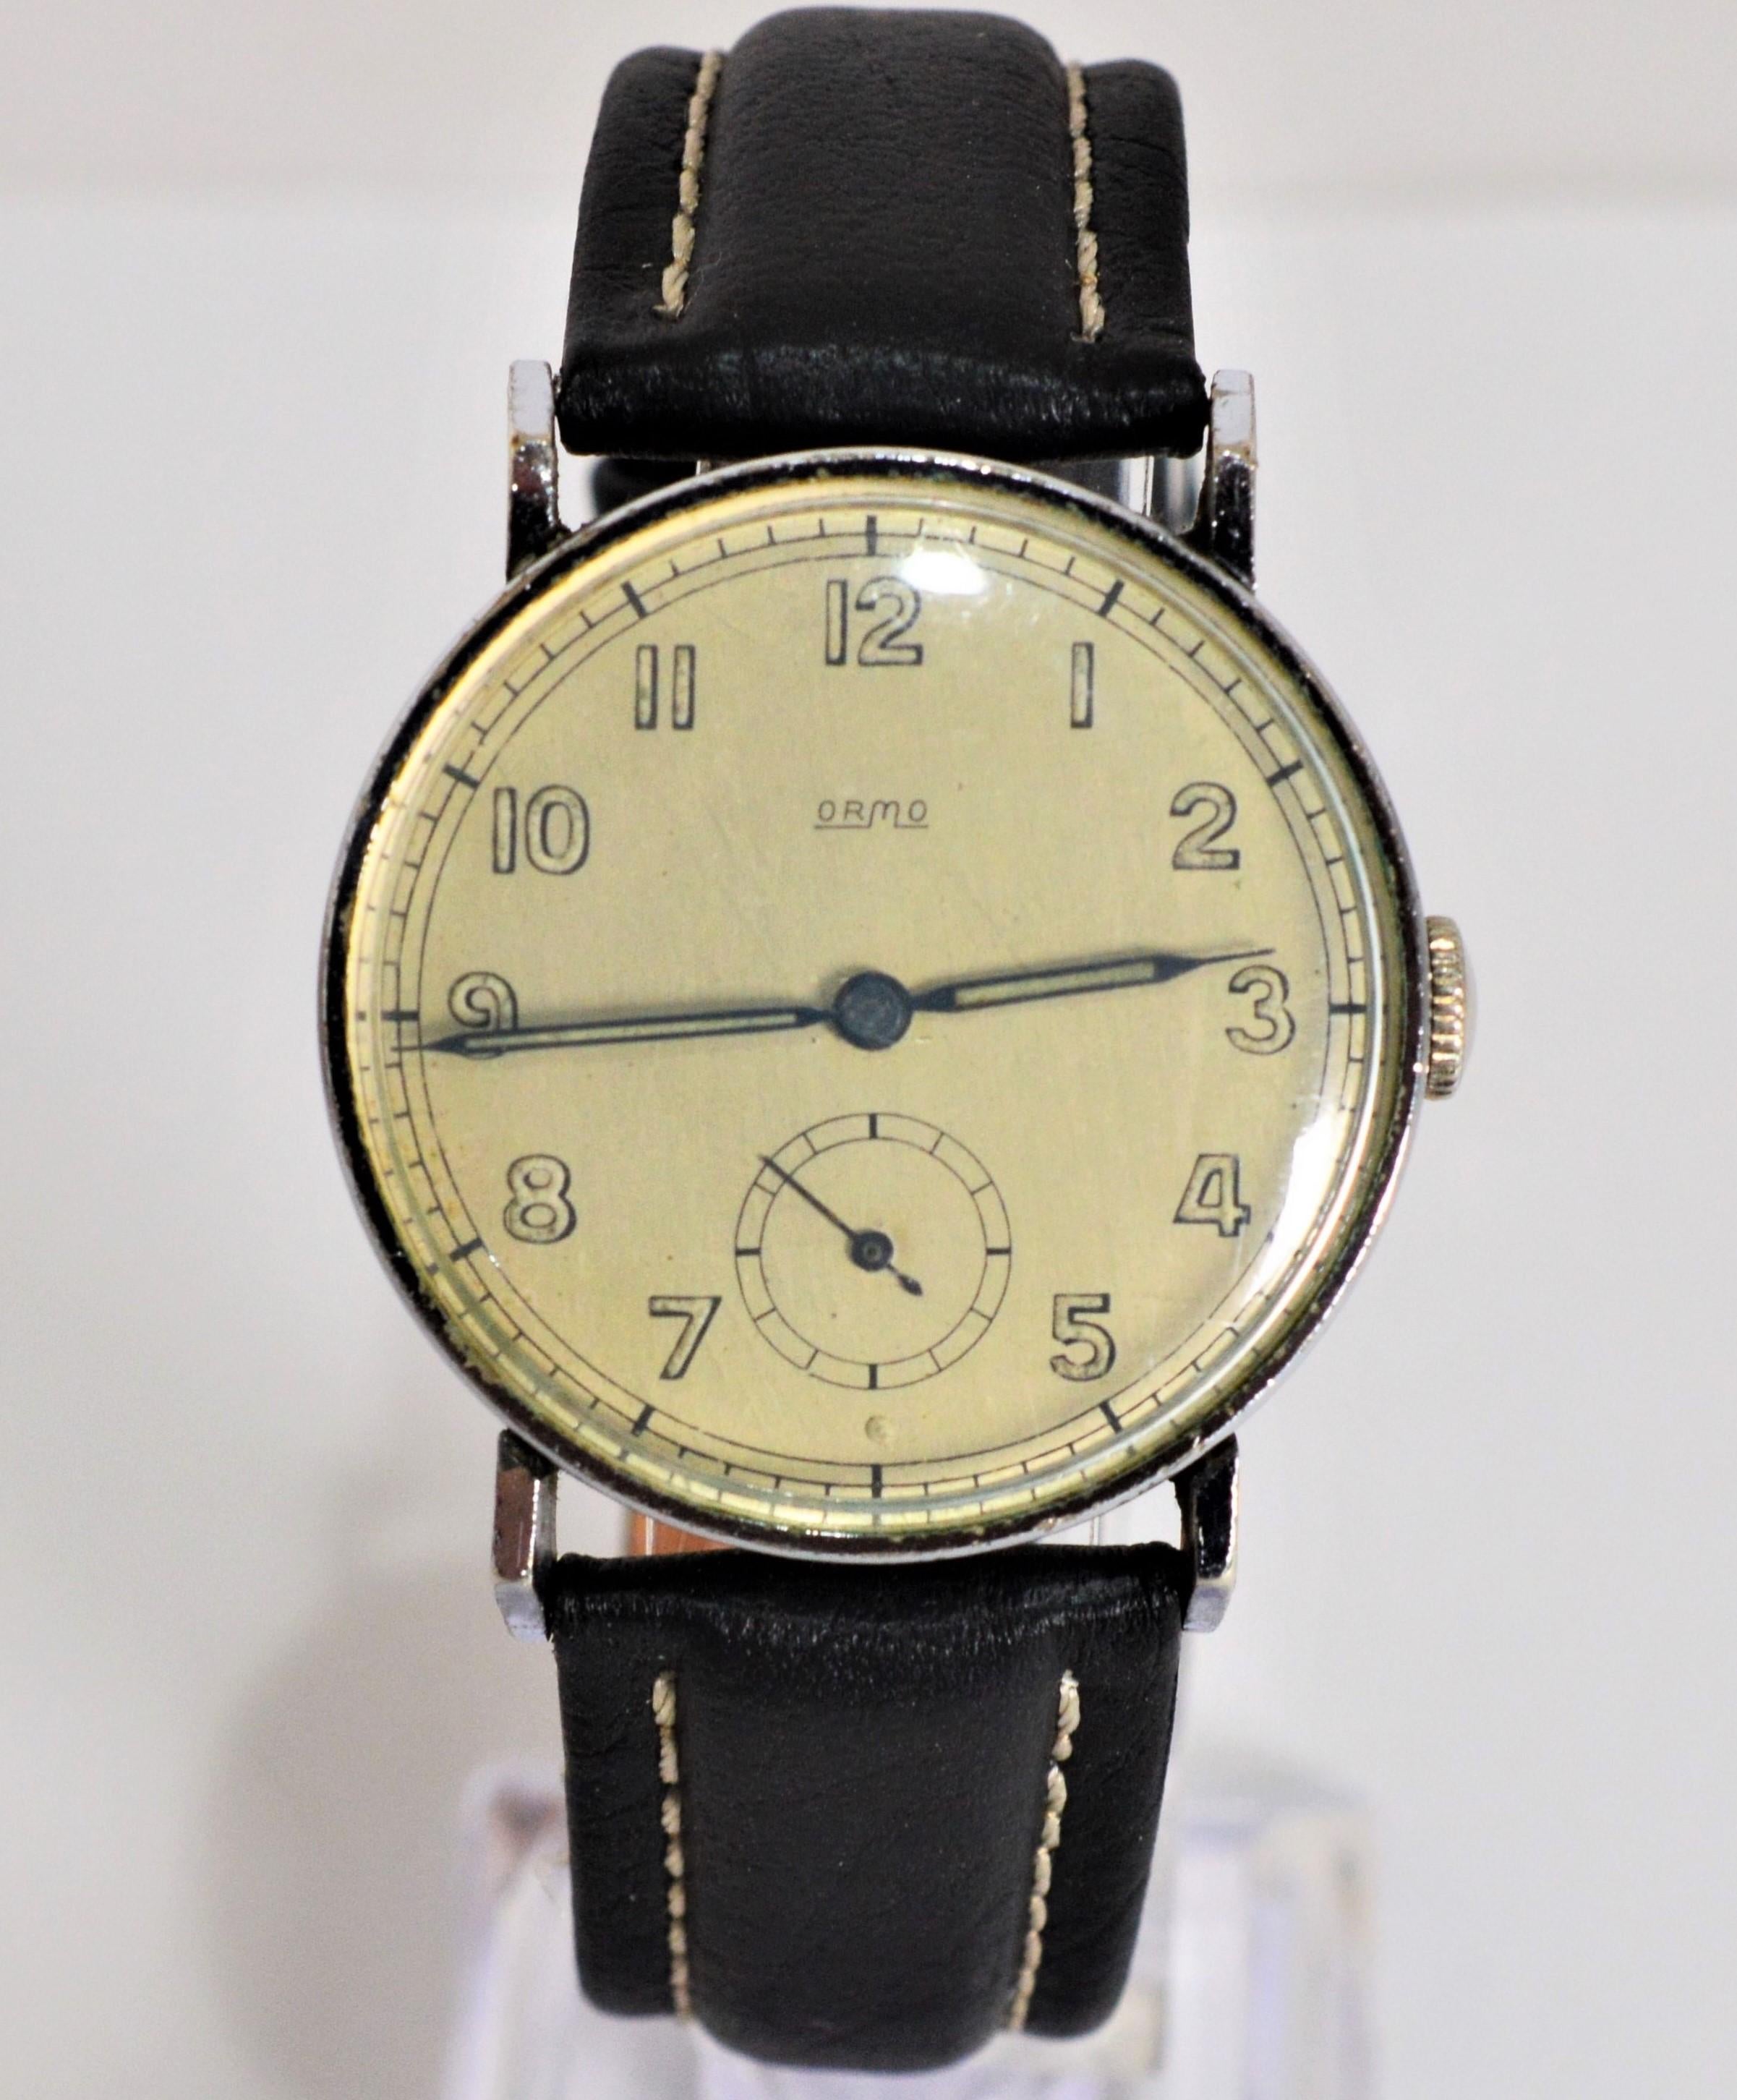 Circa 1940-1944, Pforzheim, Germany, this vintage beauty offered by Ormo proudly displays retro simplicity through its round 34mm Boden Edelstahl stainless steel case made for the German Army and impressive dial. The easy to read toned dial has